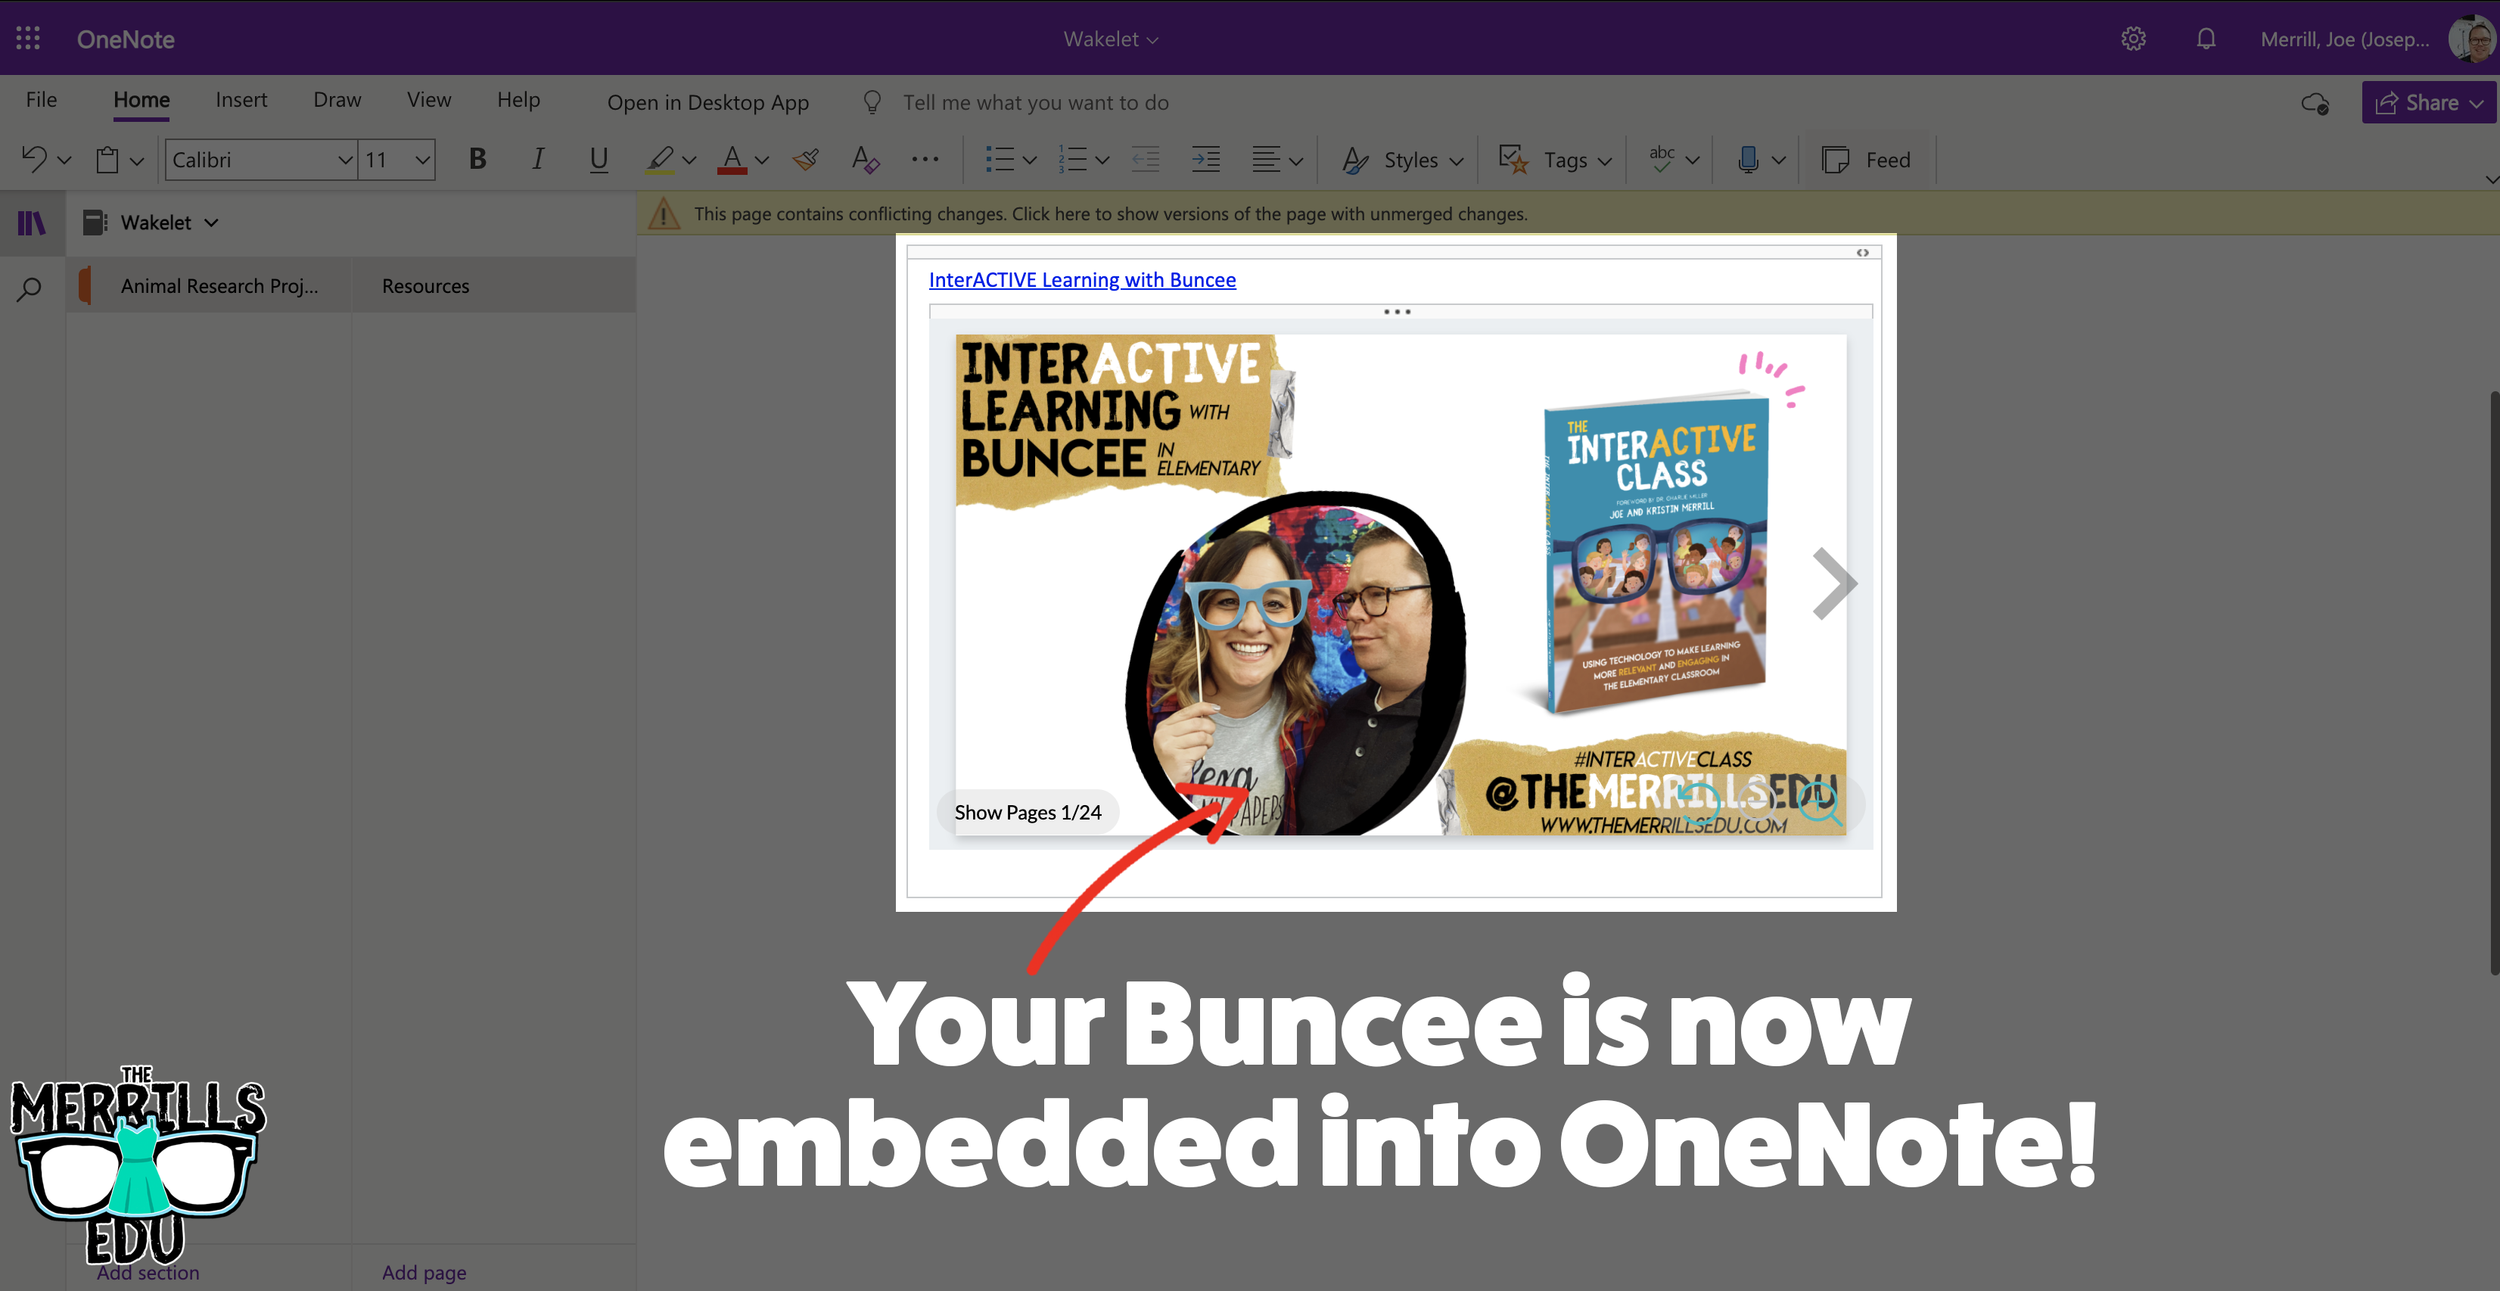 Buncee_Embedded_into_OneNote_5.png